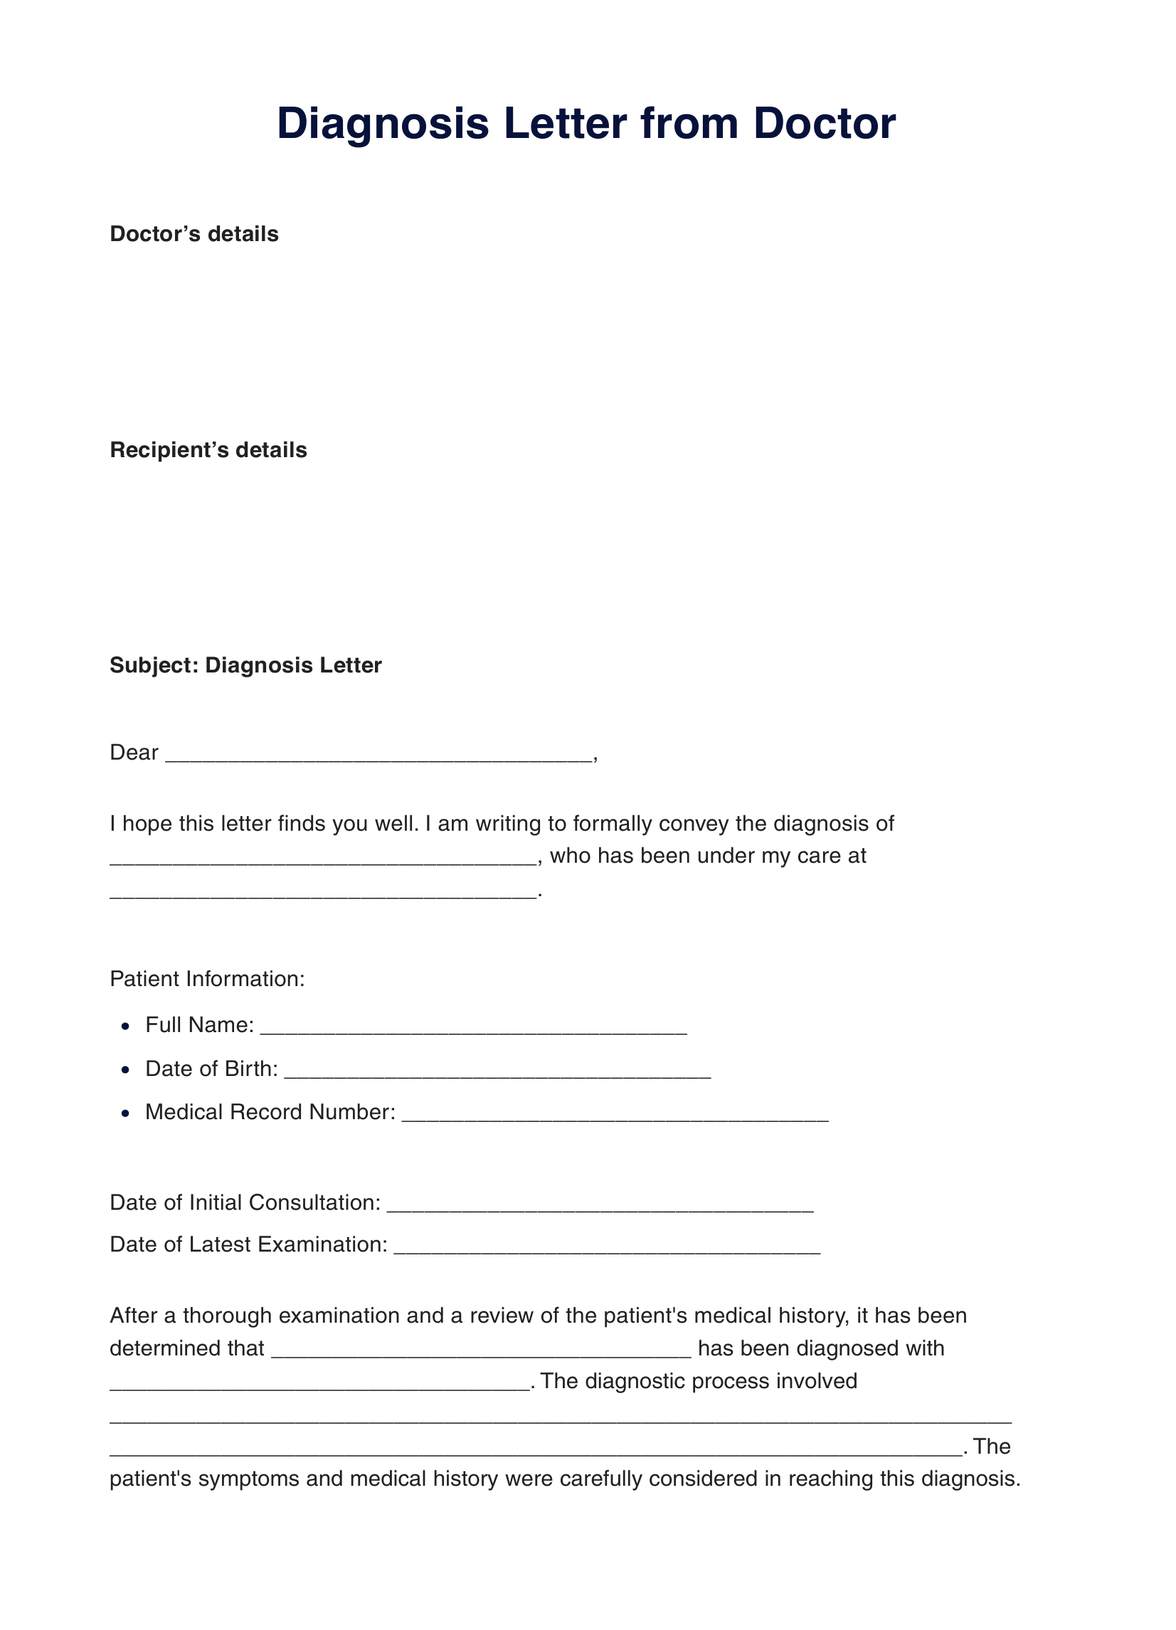 Diagnosis Letter from Doctor PDF Example